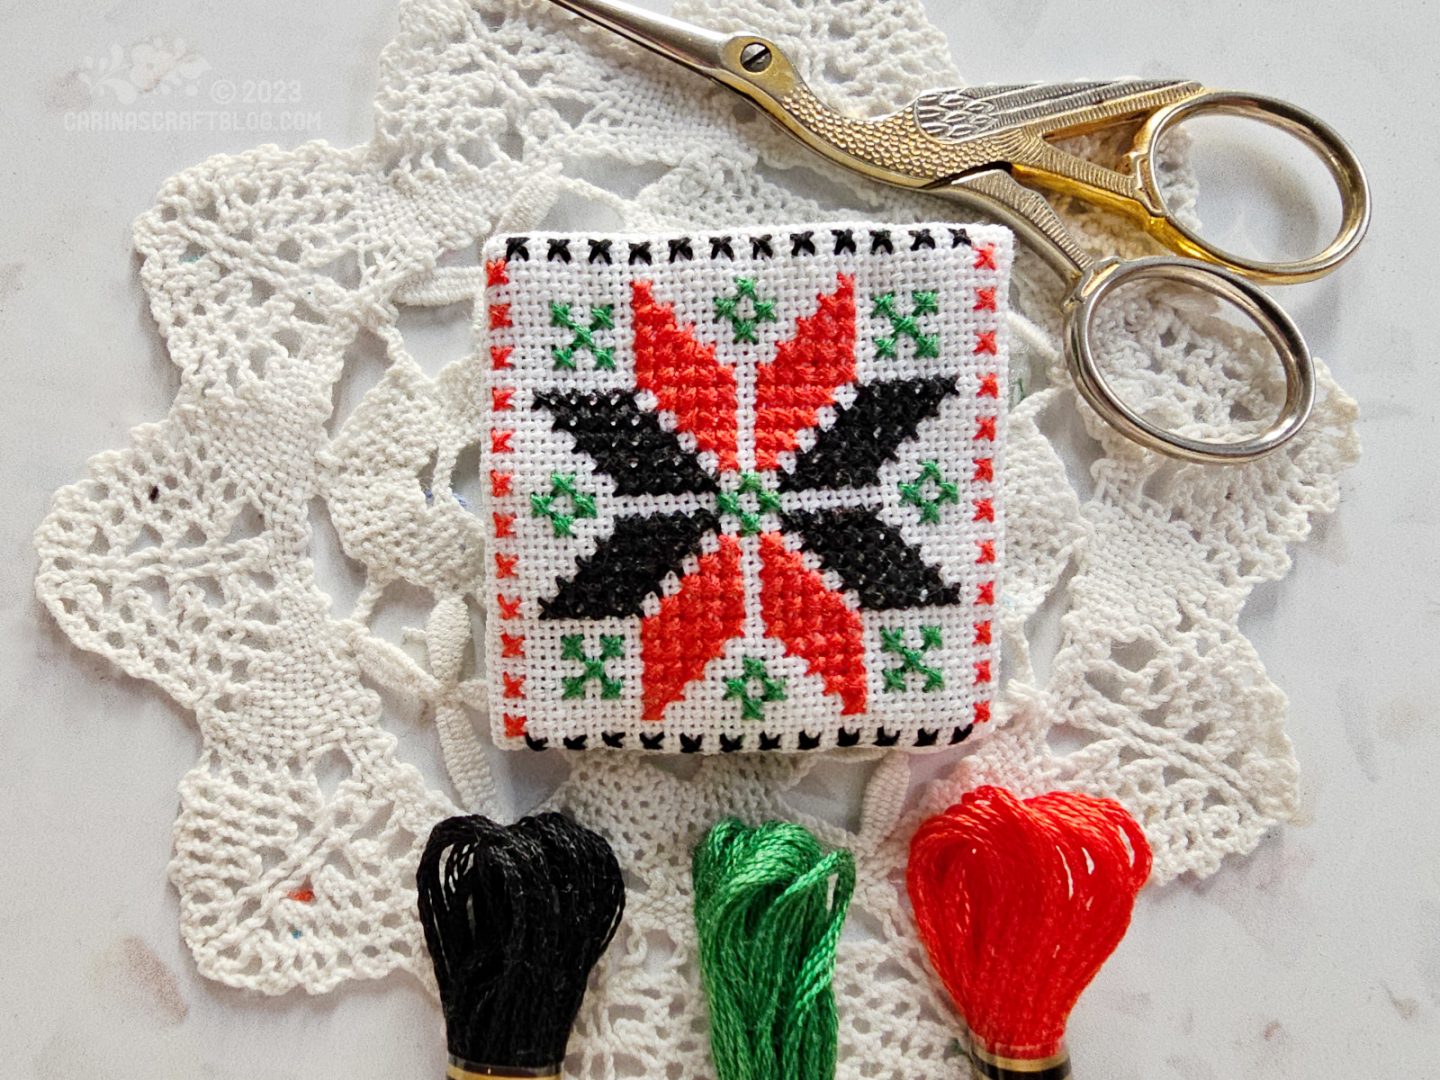 Close overhead view of a small square fabric brooch made from white fabric embroidered with a star design in red and black cross stitches.